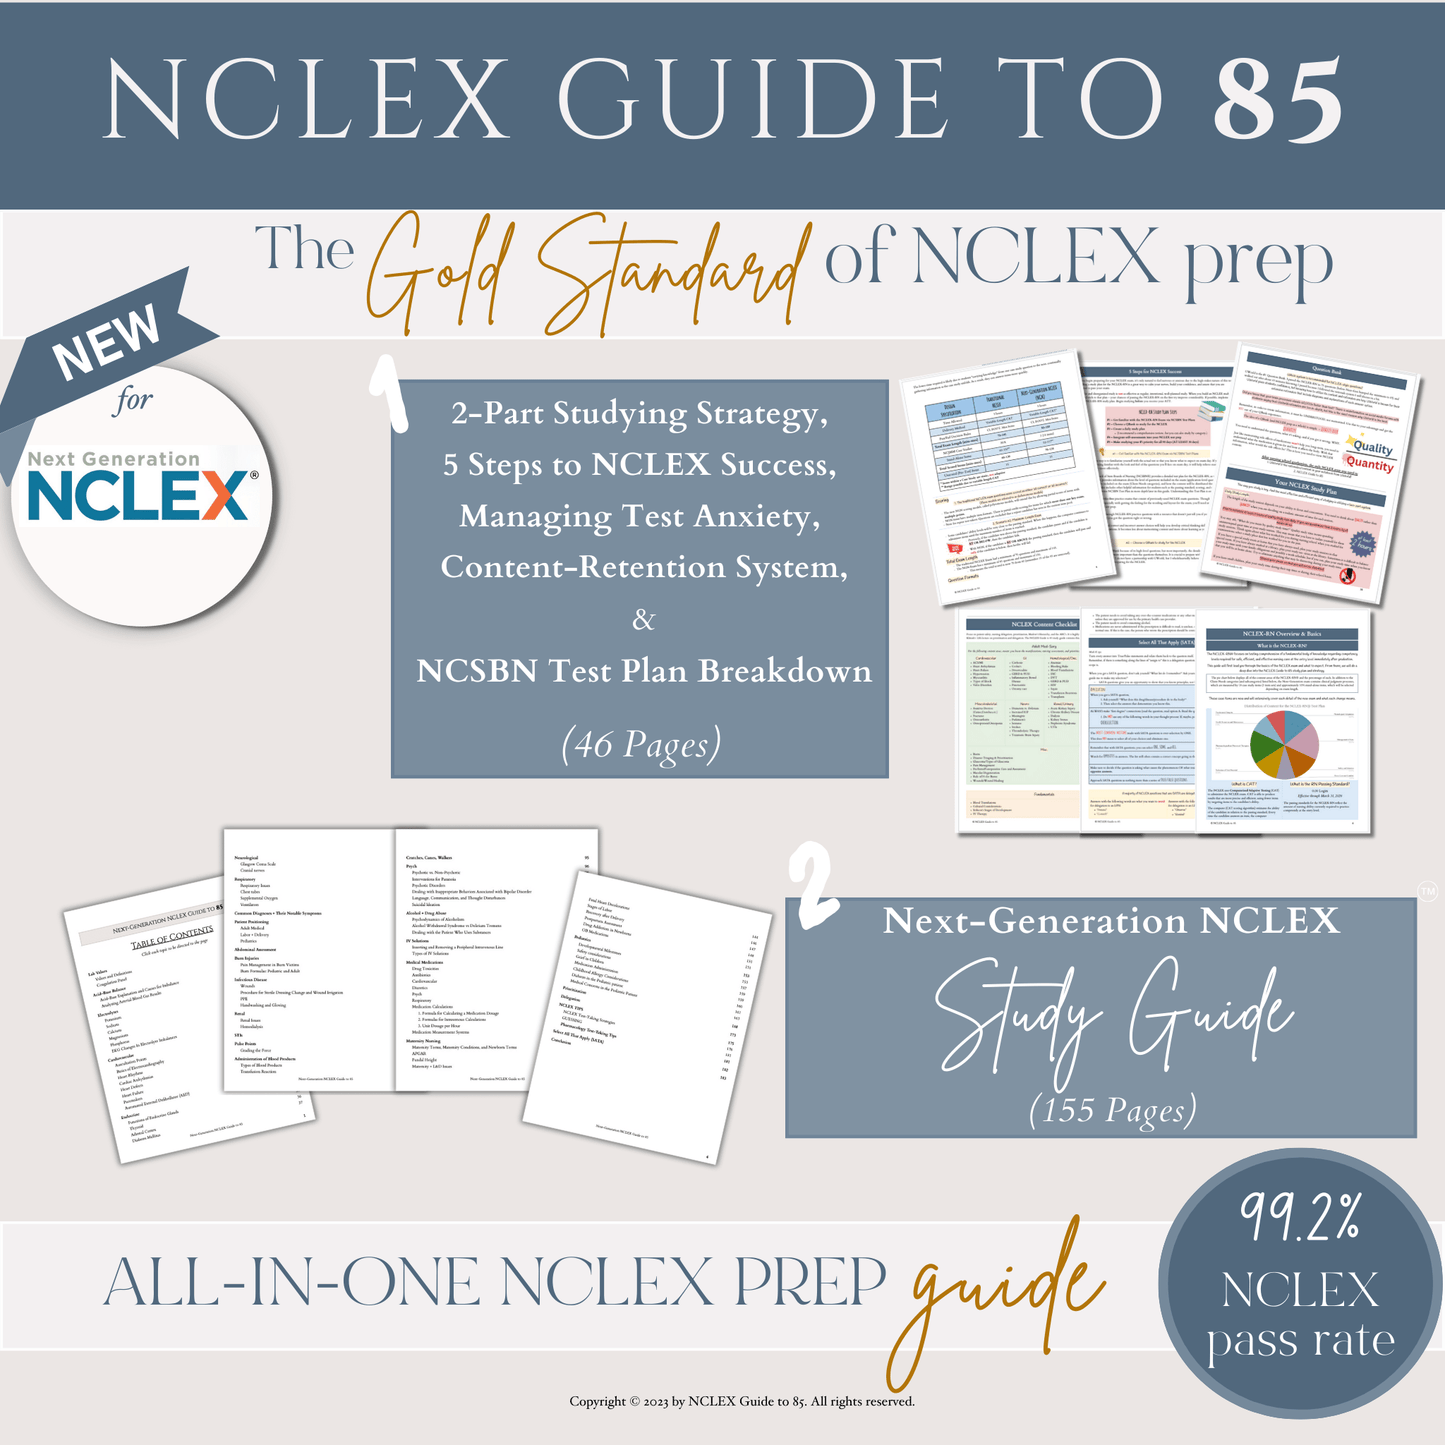 NCLEX Guide to 85 © - The Nursing Perspective